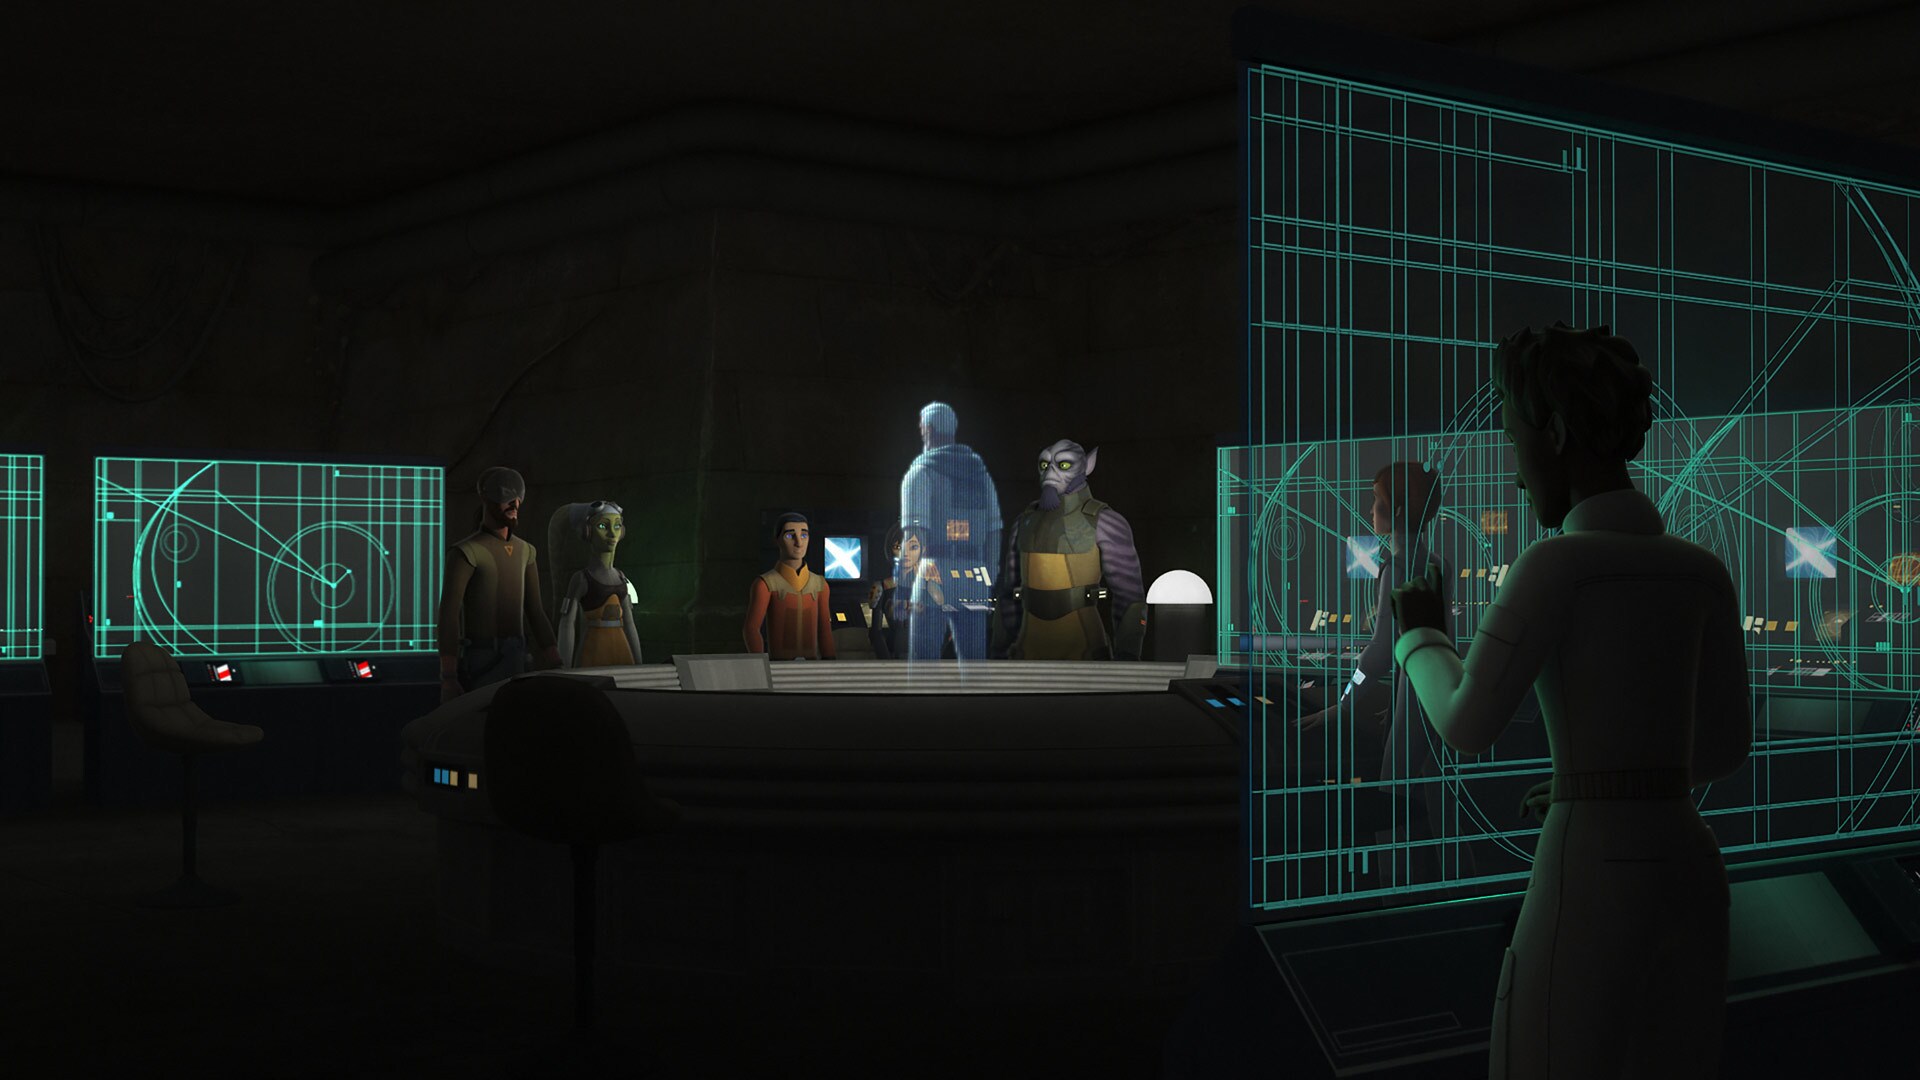 The Ghost crew arrives at Yavin 4 and immediately meet with Mon Mothma. She's received a transmis...